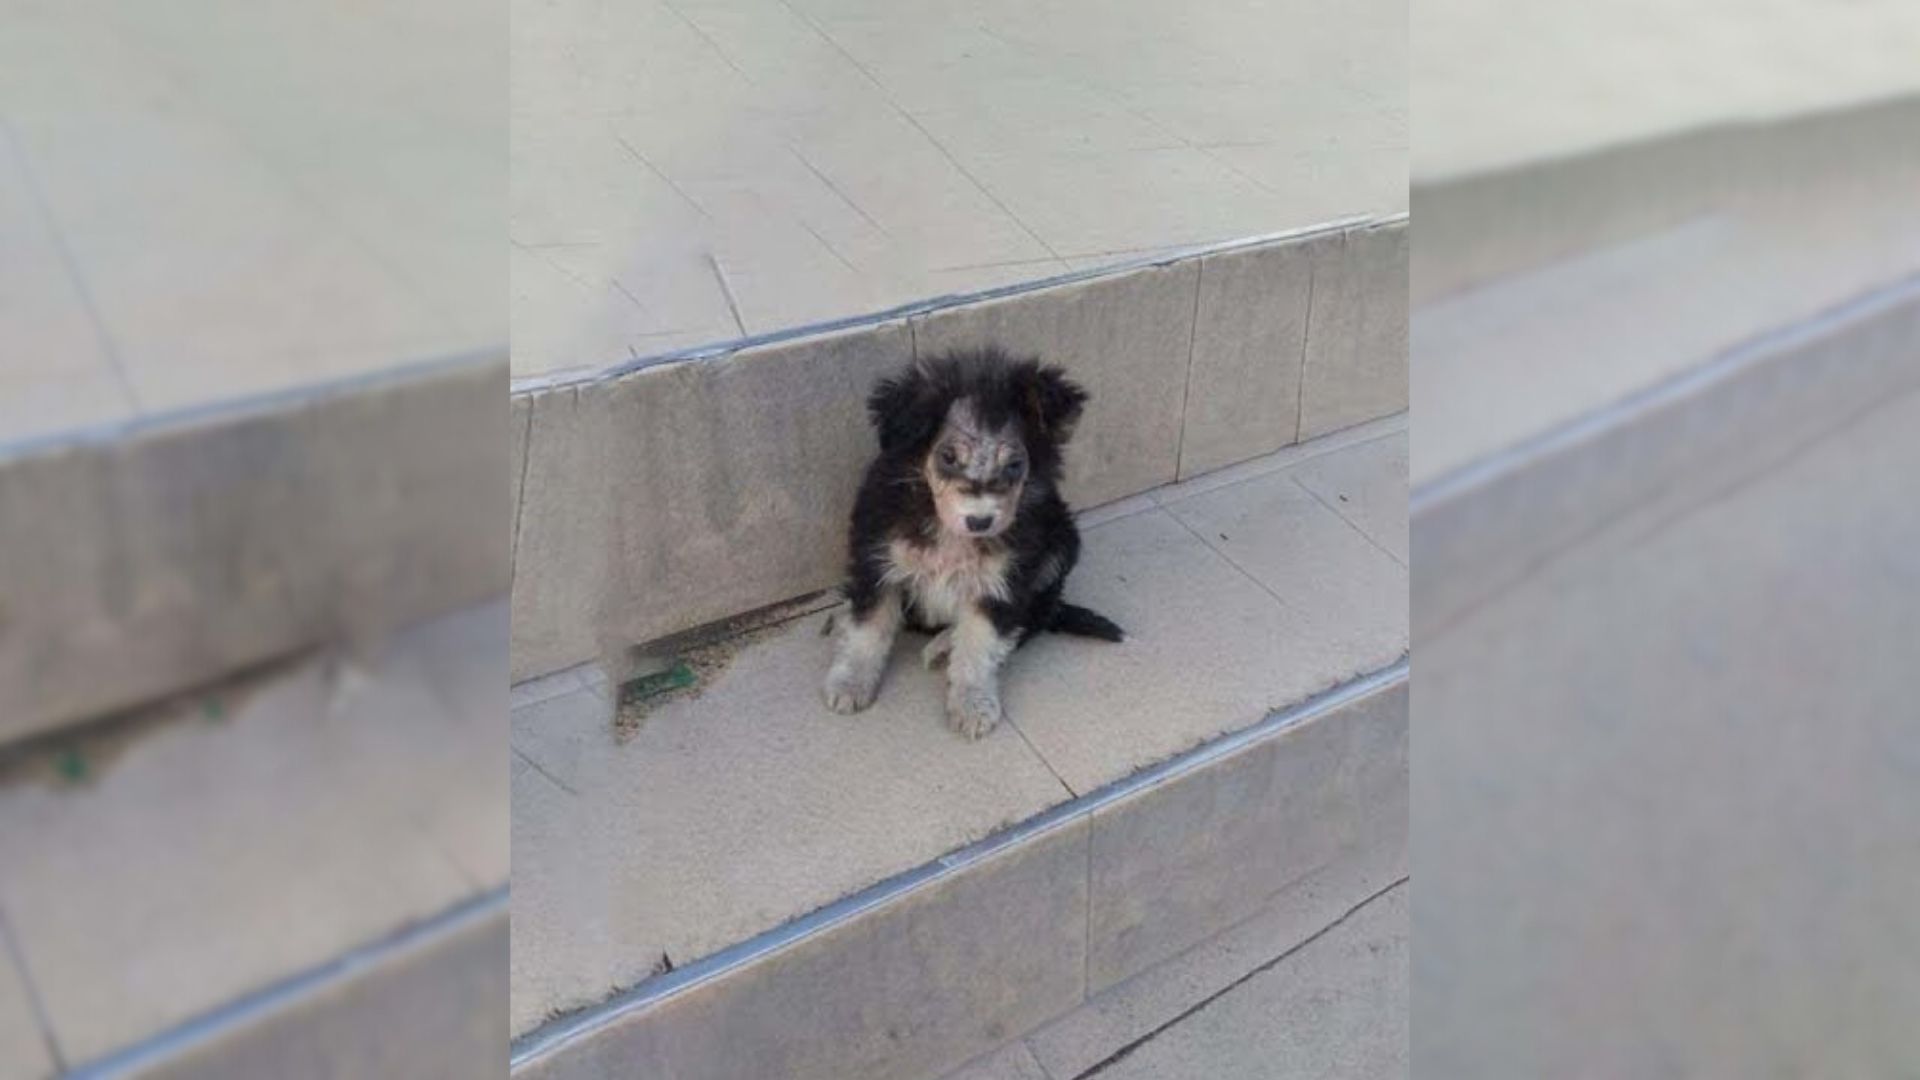 People Ignored This Injured Puppy Standing Near A Supermarket But Then She Met Someone Amazing